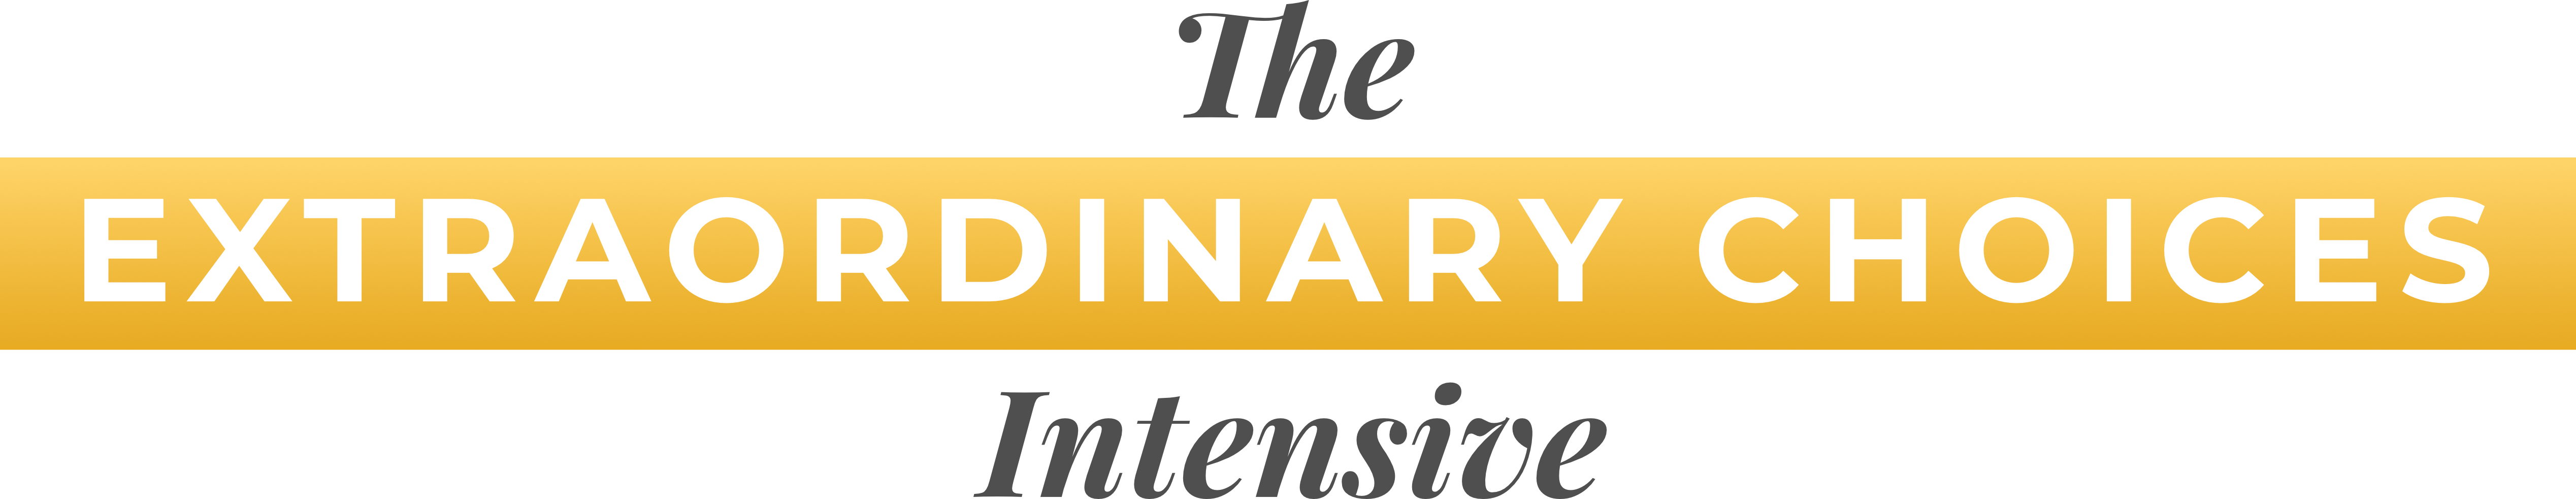 Extraordinary Choices Intensive